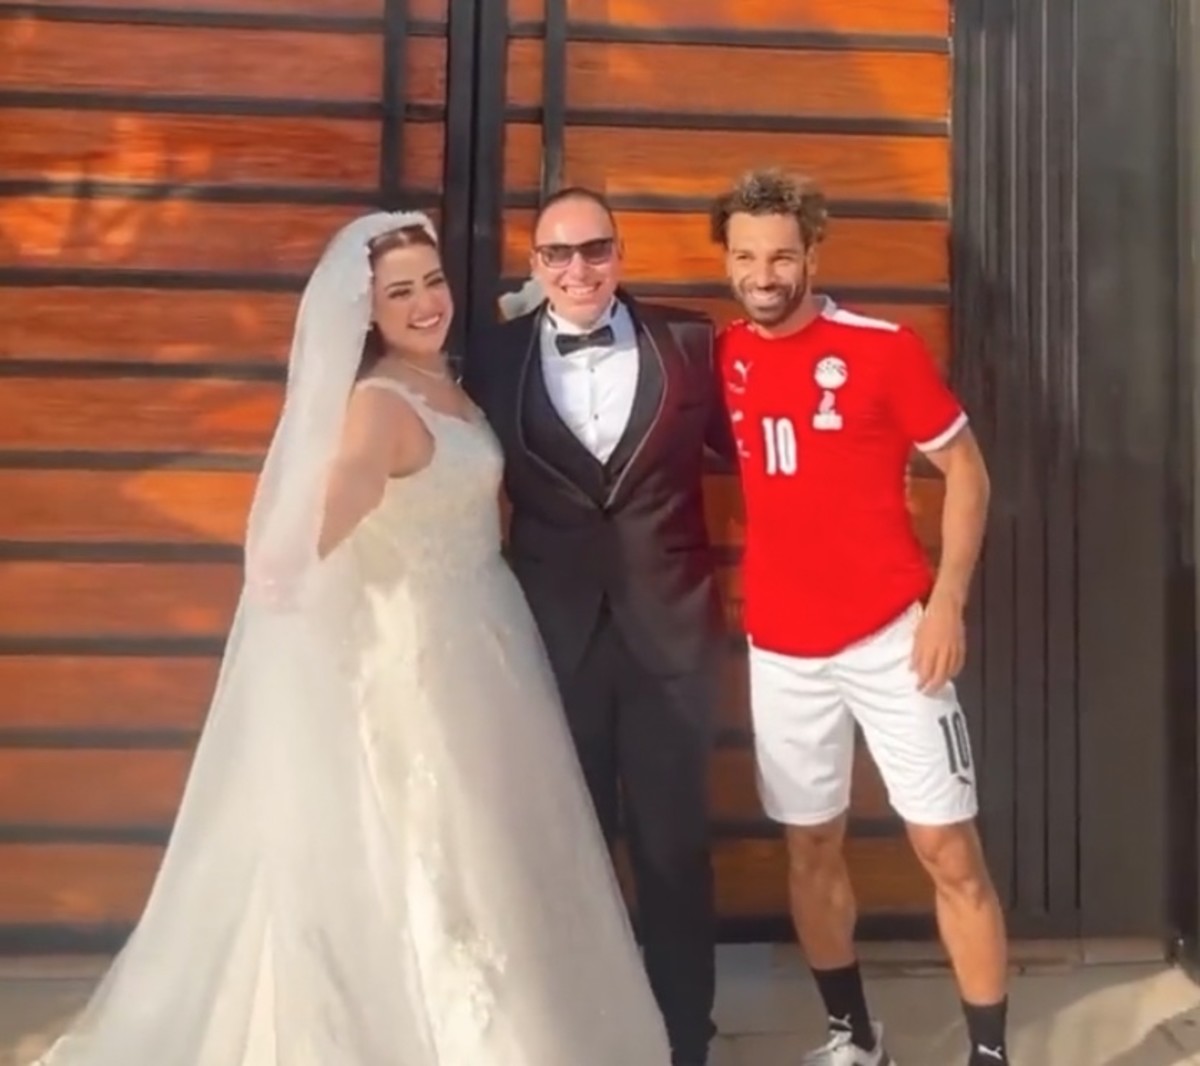 Mo Salah pictured (right) posing with a newly-married couple on their wedding day